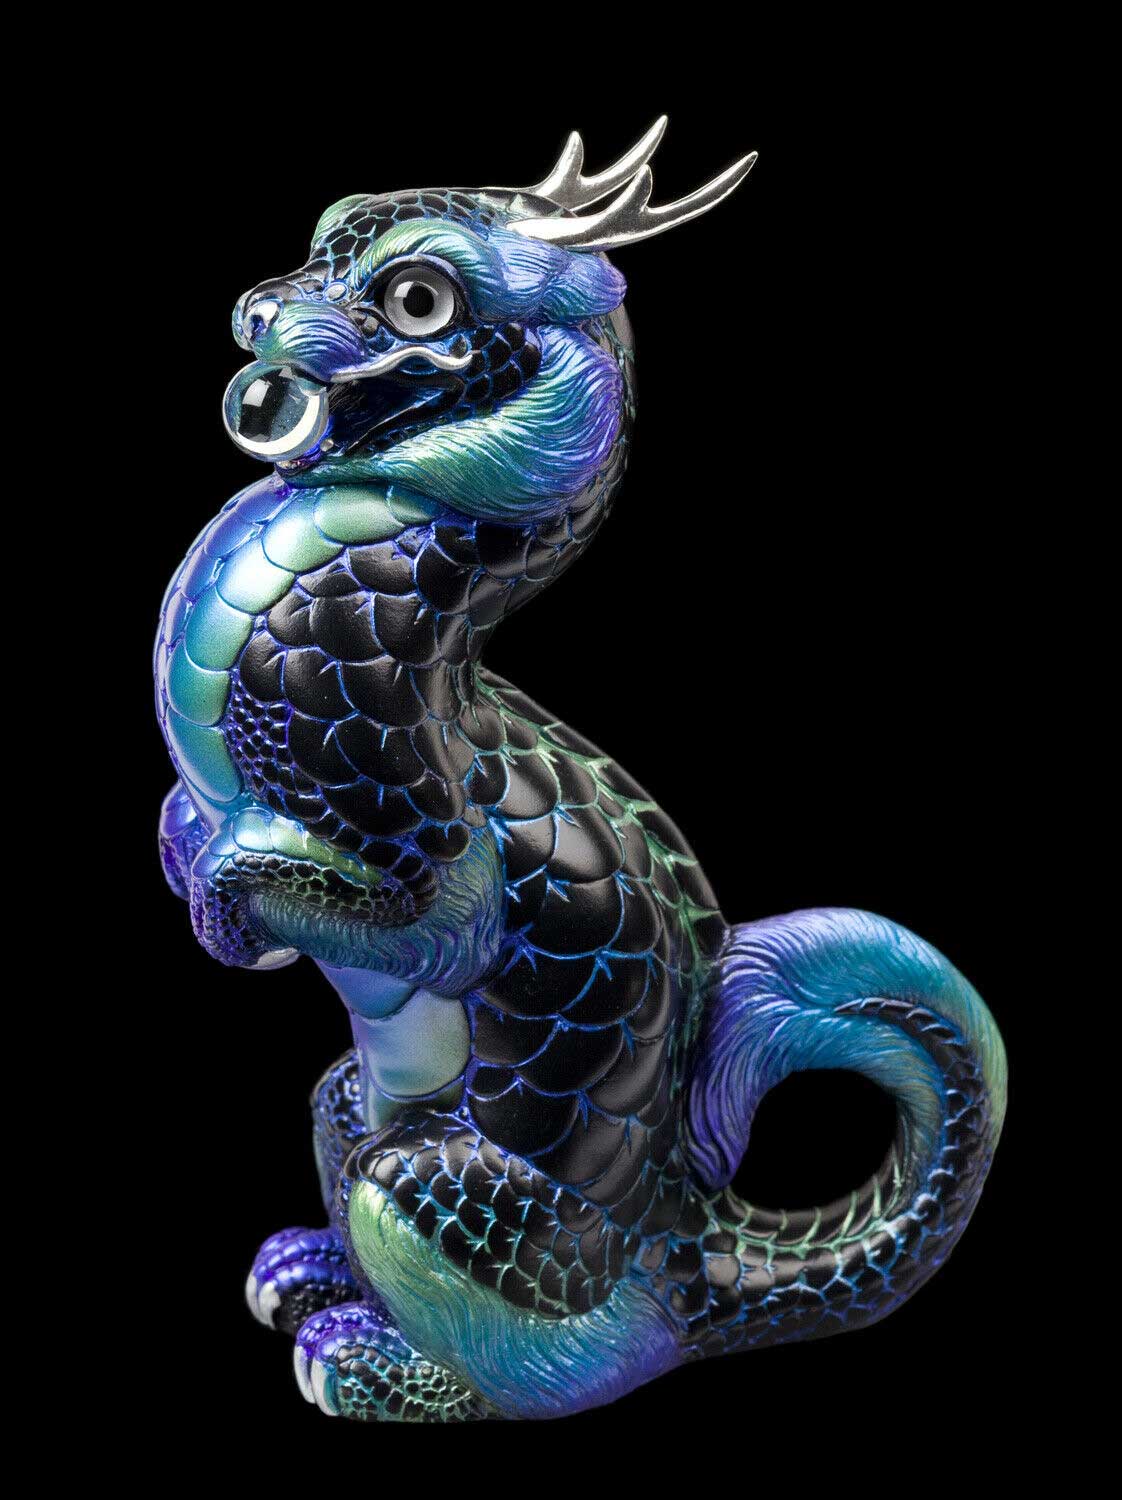 20220202-Onyx-Moonstone-Sitting-Young-Oriental-Dragon-Test-Paint-1-by-Gina